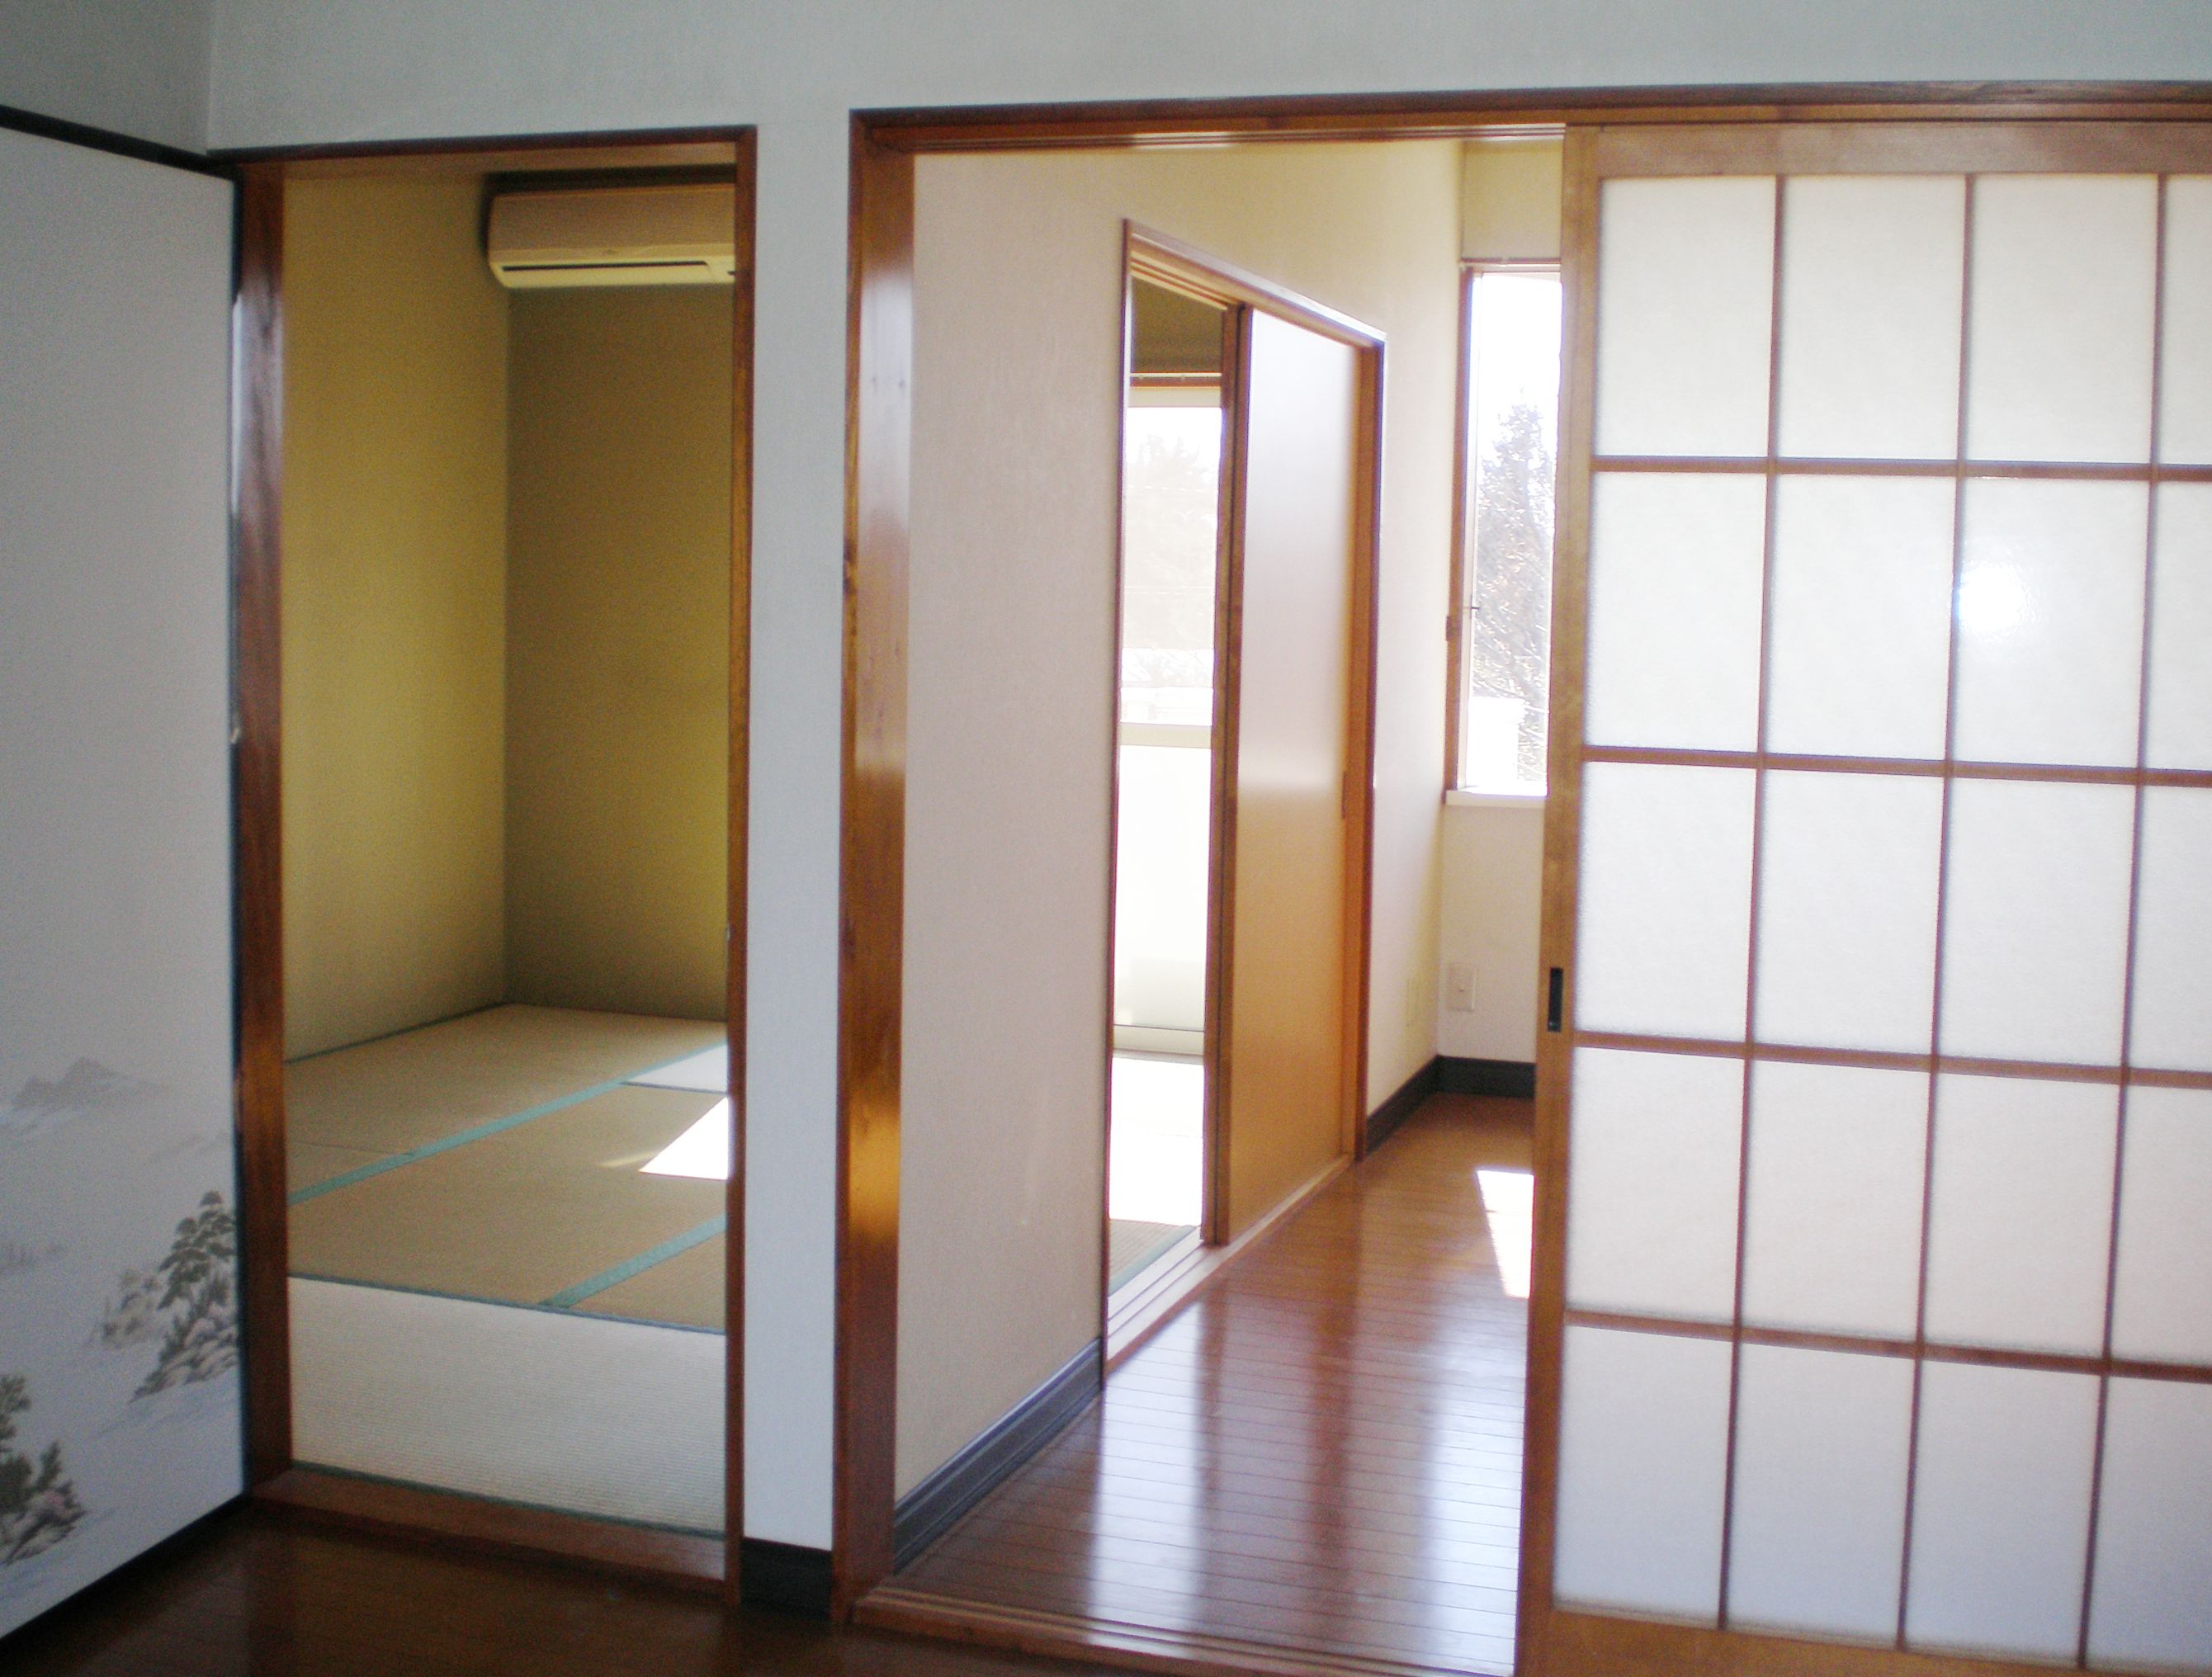 Living and room. Western-style from DK ・ Japanese-style room